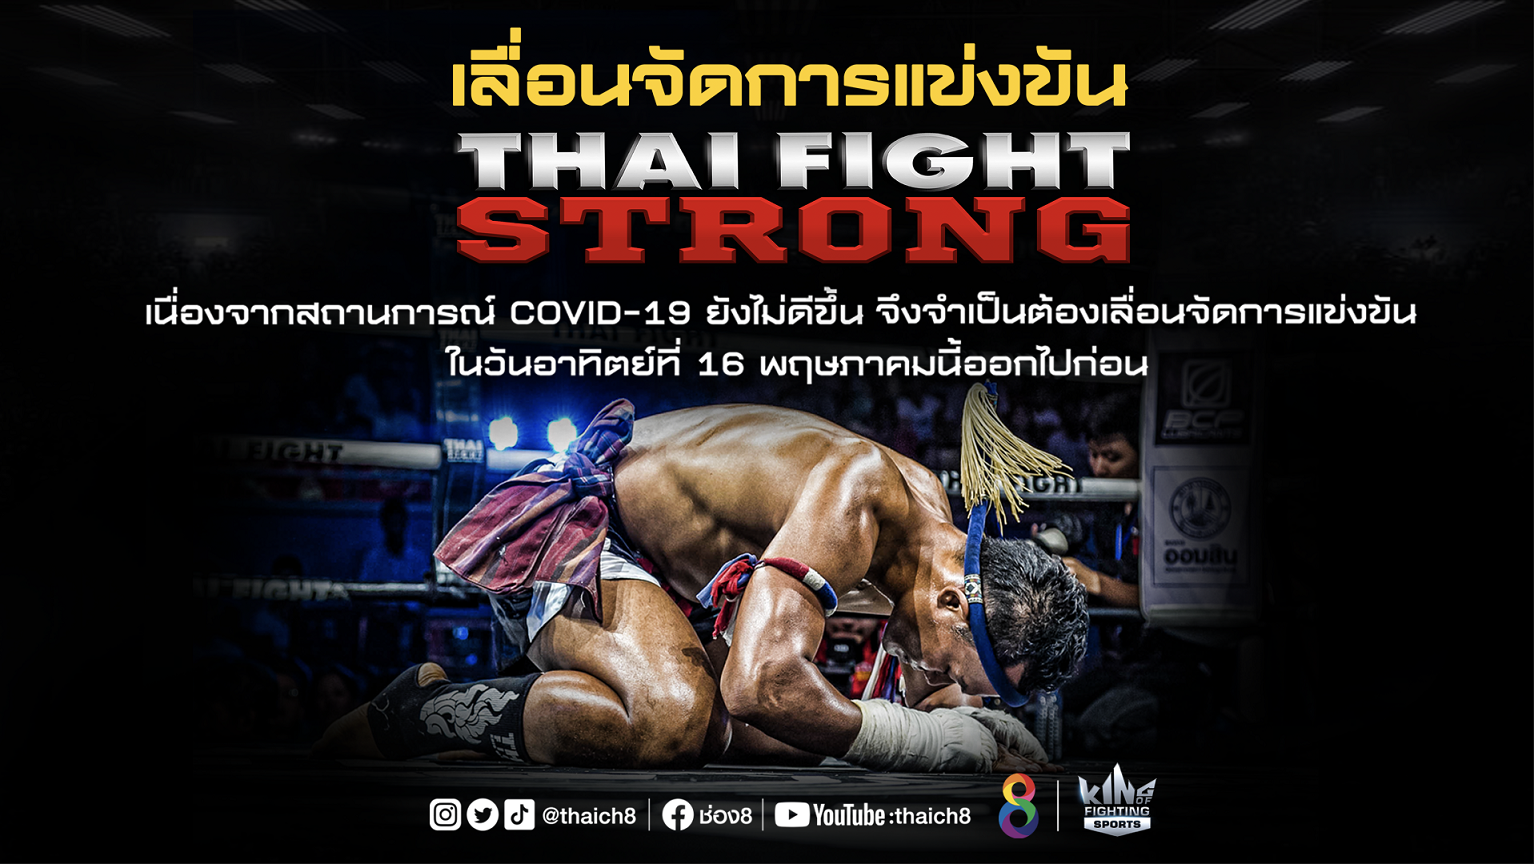 Thai Fight Strong